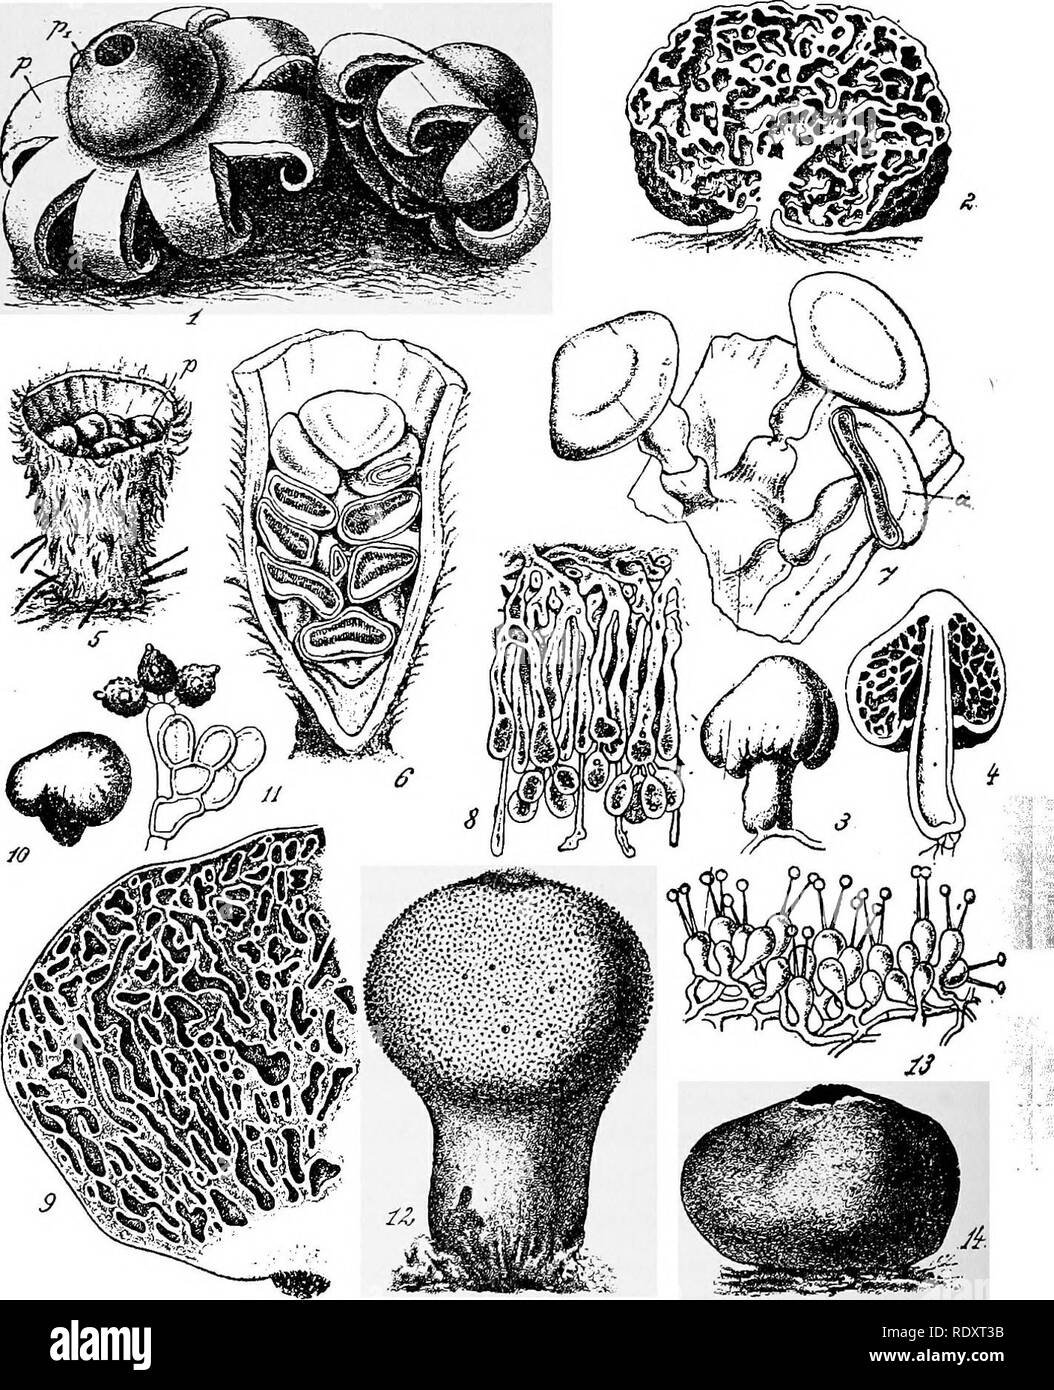 . A manual of poisonous plants, chiefly of eastern North America, with brief notes on economic and medicinal plants, and numerous illustrations. Poisonous plants. 246 MANUAL OF POISONOUS PLANTS. Fig. 74. Puff balls and their Allies. Gasteromycetes. 1. Geaster fimbriatus,p Outer peridium, pi Inner peridium. 2. Gautiera morchallaeformis, sectional view of fruiting body. 3. Secotium erythrocephalum. 4. Sectional view of the No. 3. 5. Bird's Nest Fungus iCyathus striatus), p Peridia of spore bearing body, the outer peridium open on top showing attachment of fruiting bodies. 7. The same showing thr Stock Photo